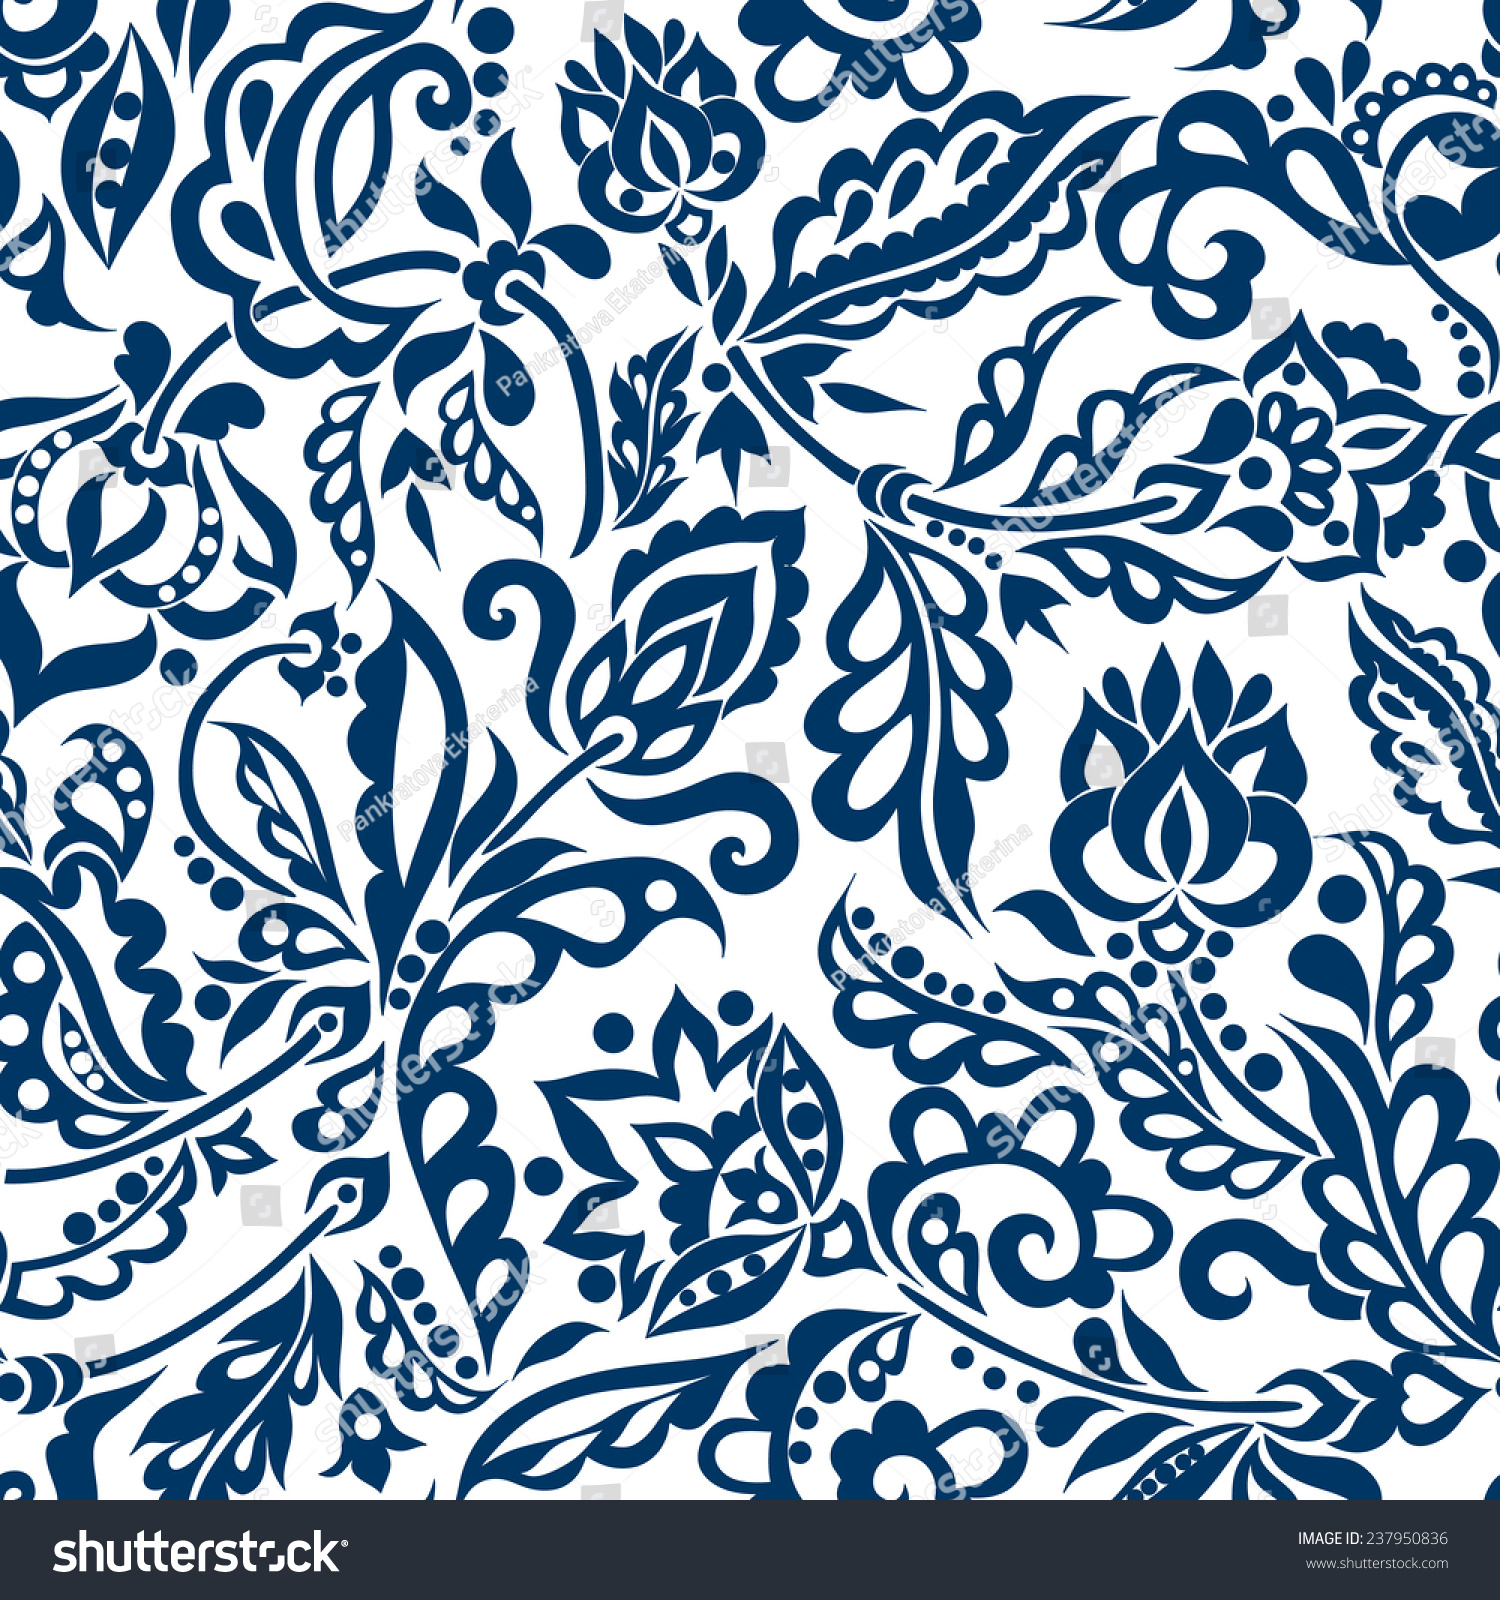 Floral Pattern With Leaves And Flowers, Decorative Motive. Vector ...